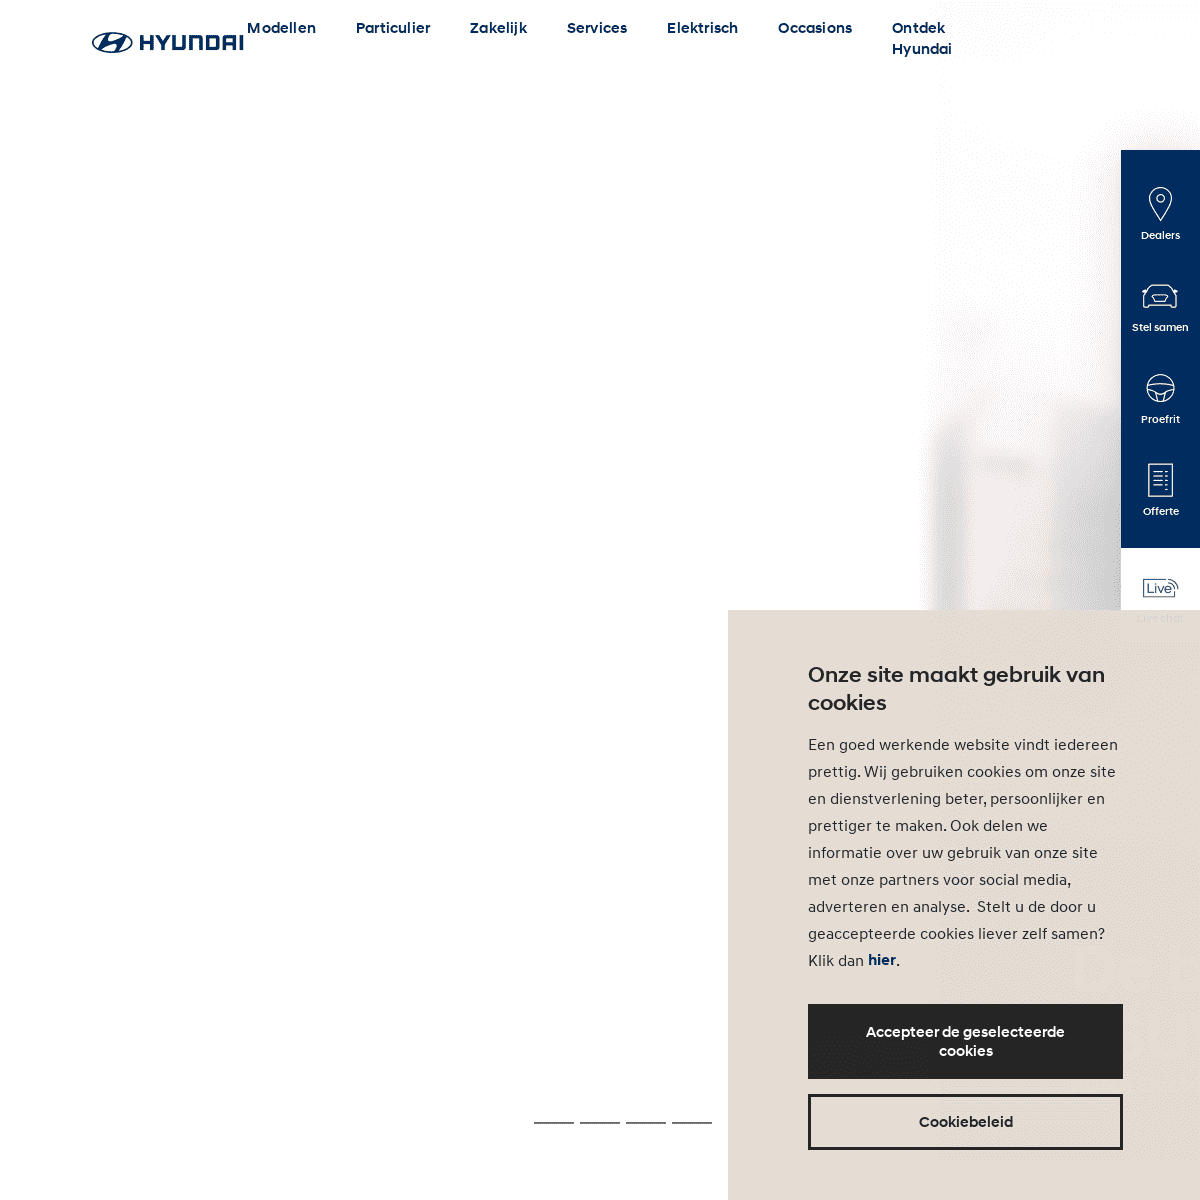 A complete backup of https://hyundai.nl